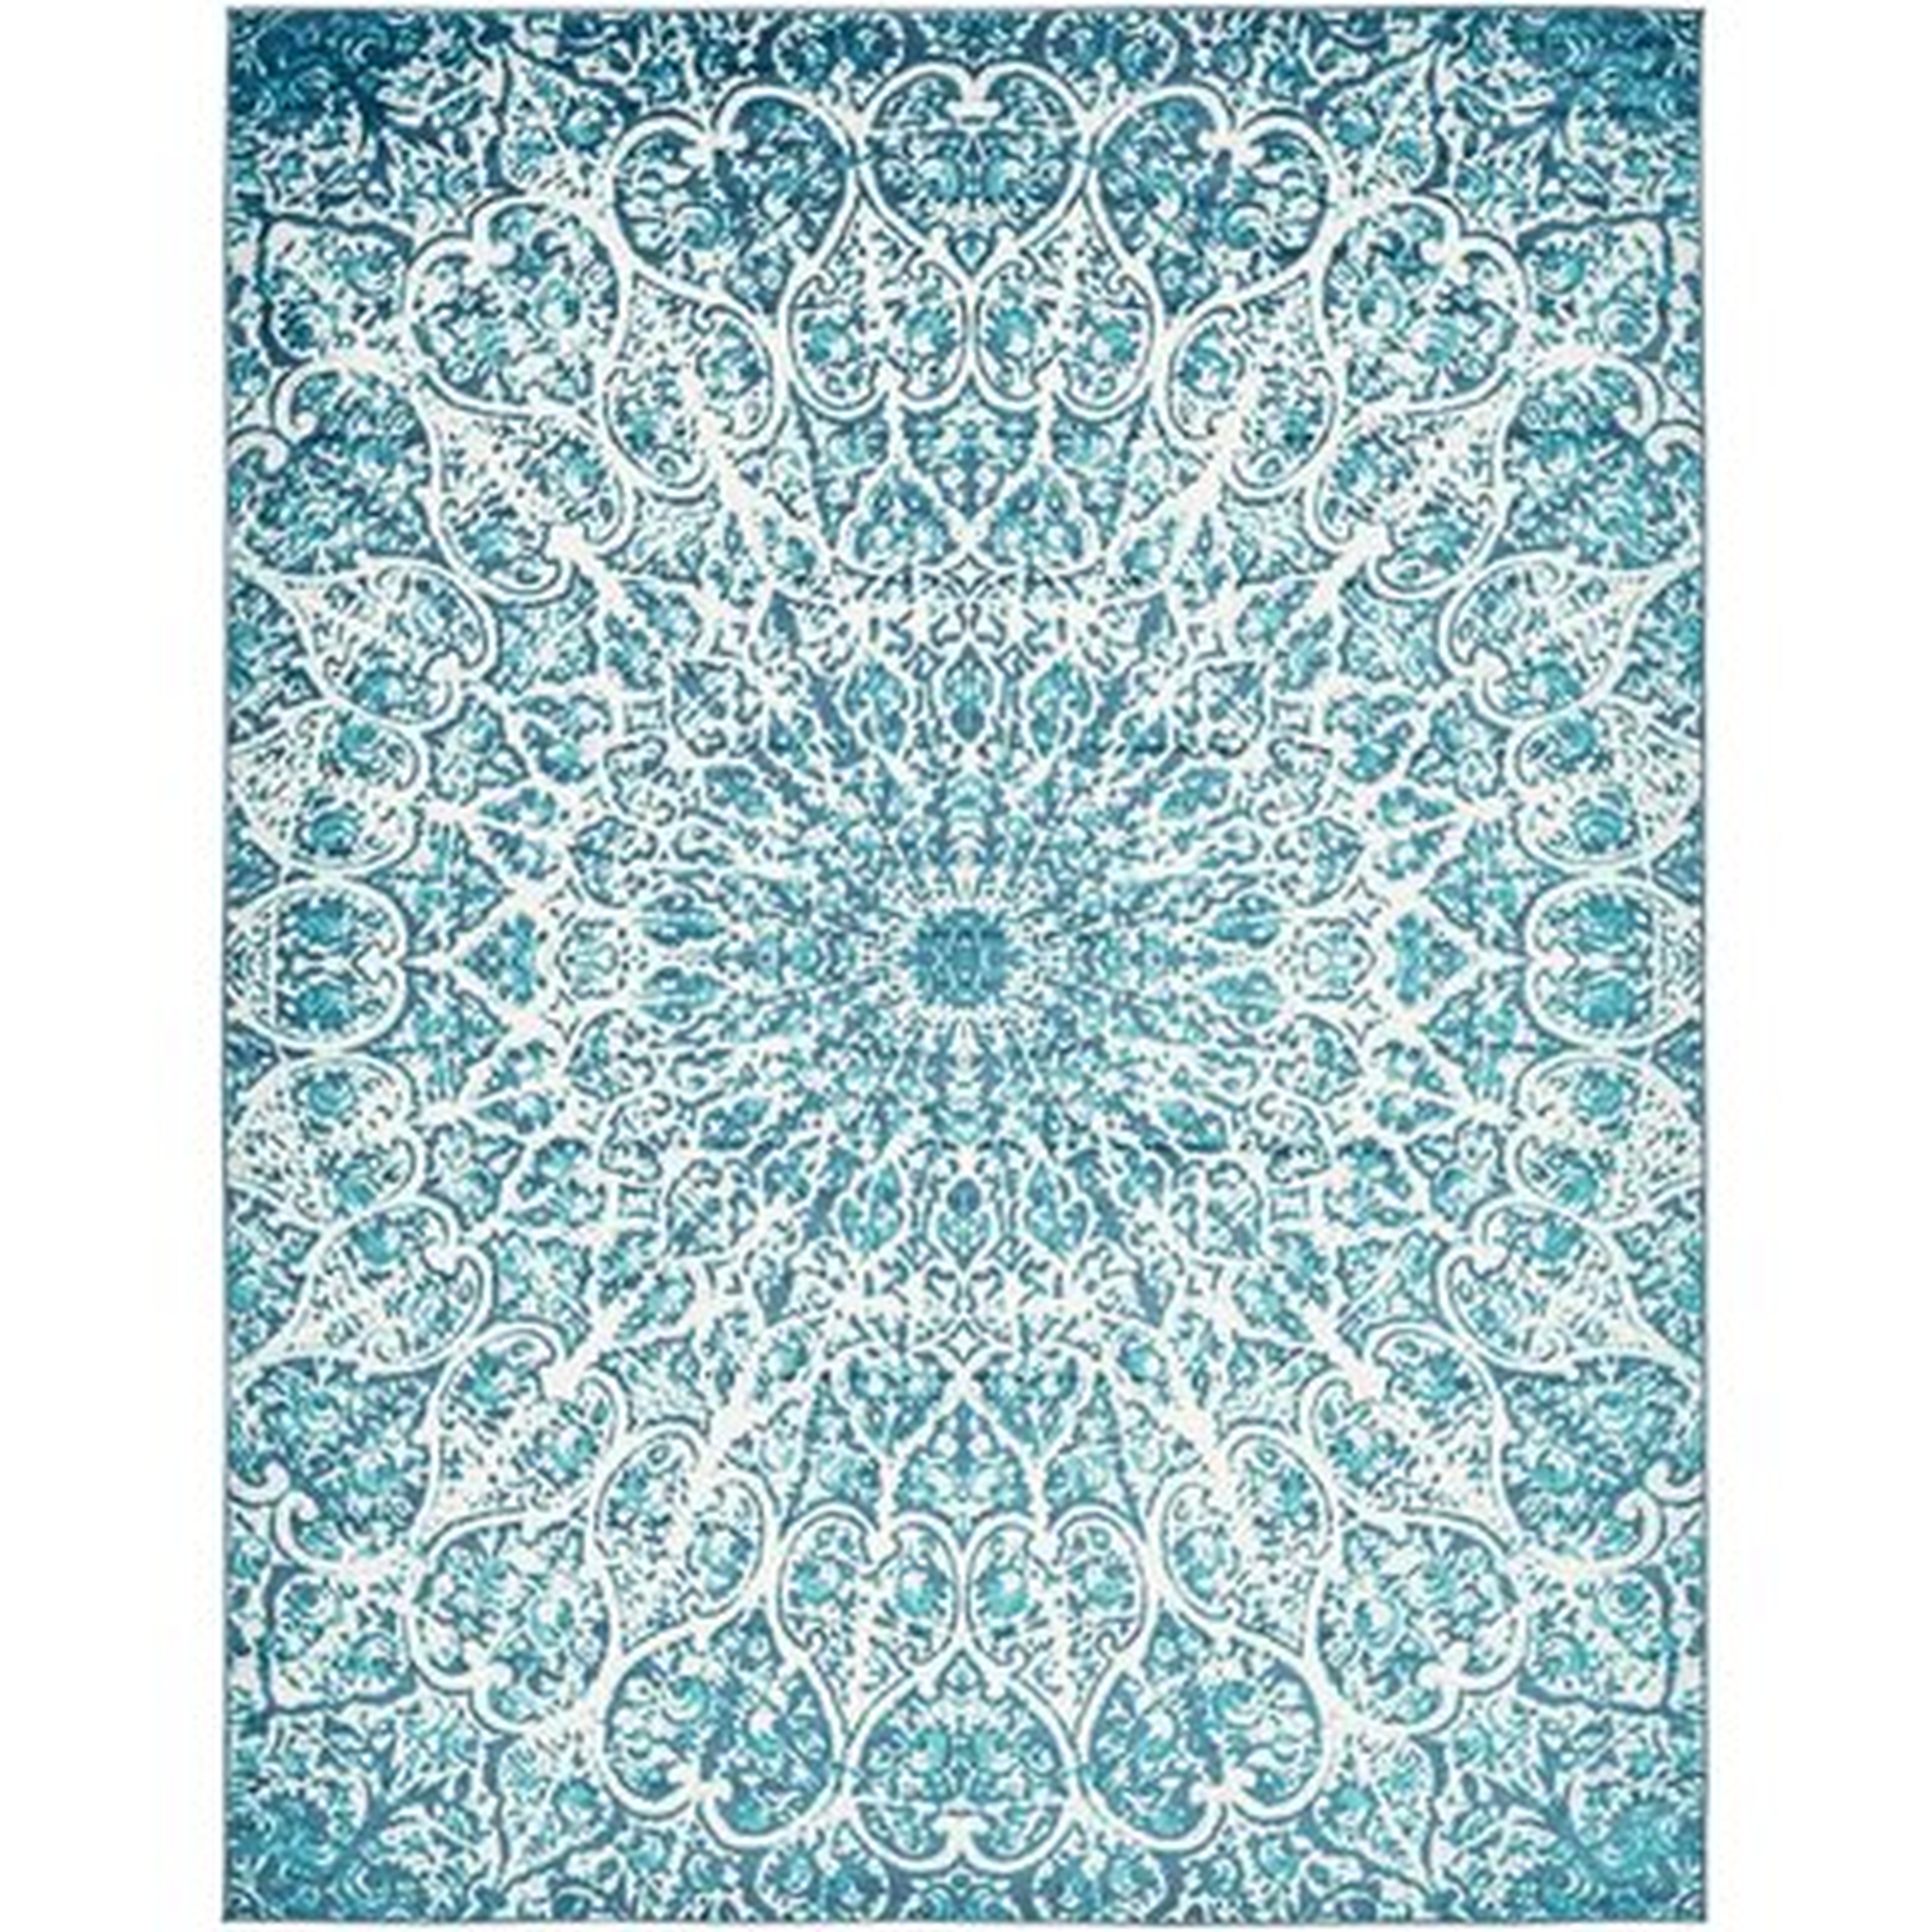 Dyanni Collection Traditional Vintage Area Rug, 9' X 12', Turquoise/Ivory - Wayfair